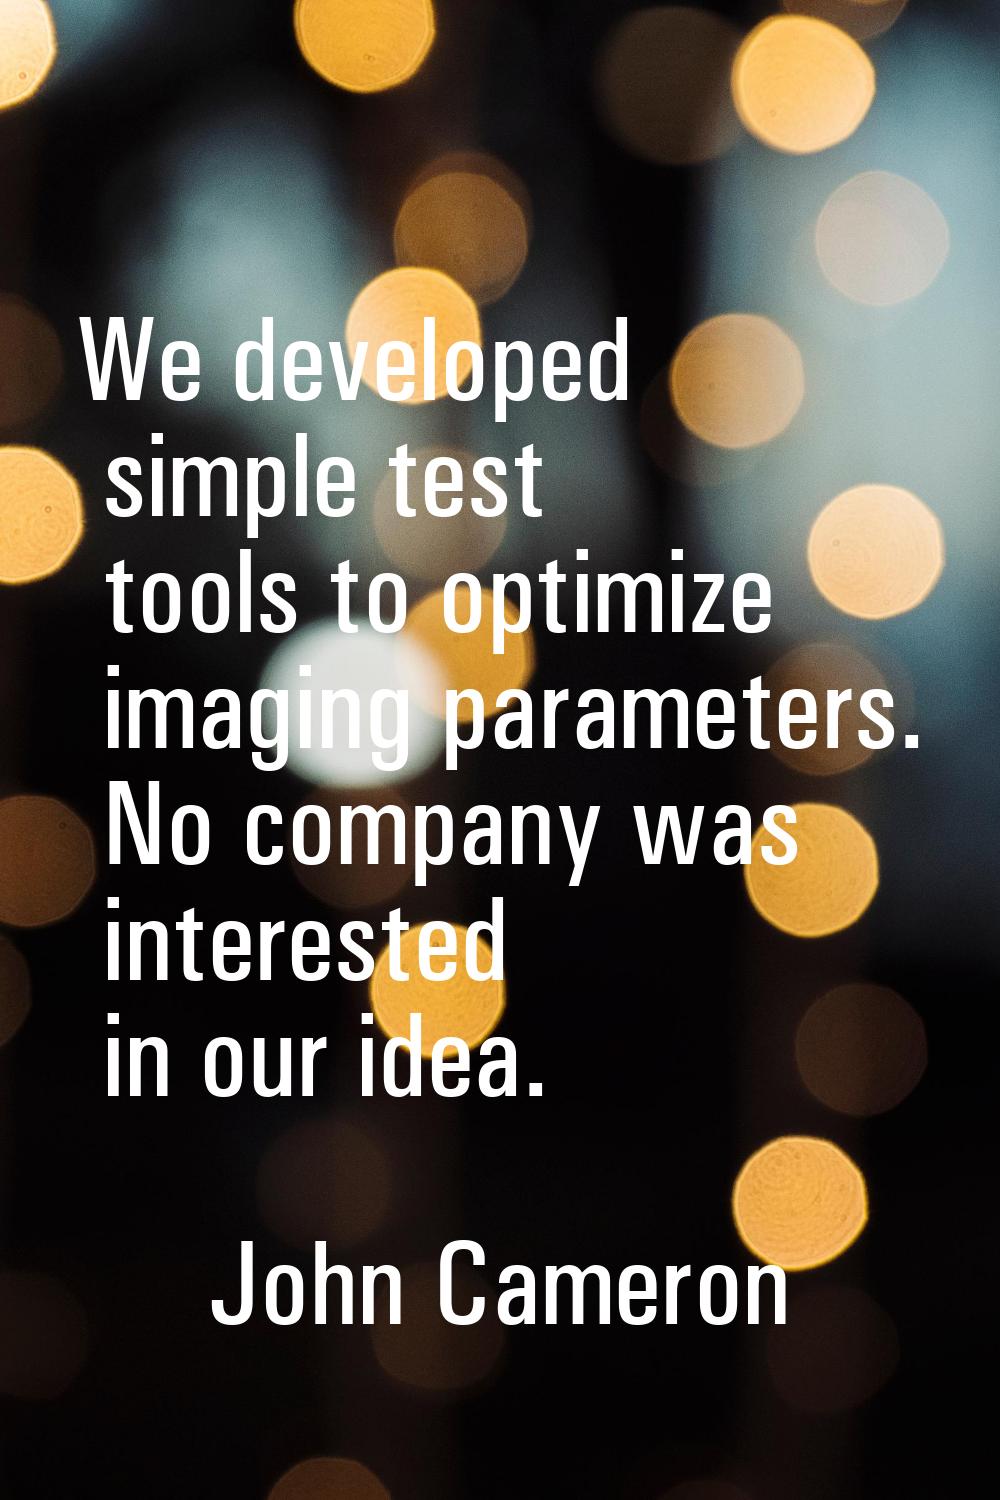 We developed simple test tools to optimize imaging parameters. No company was interested in our ide